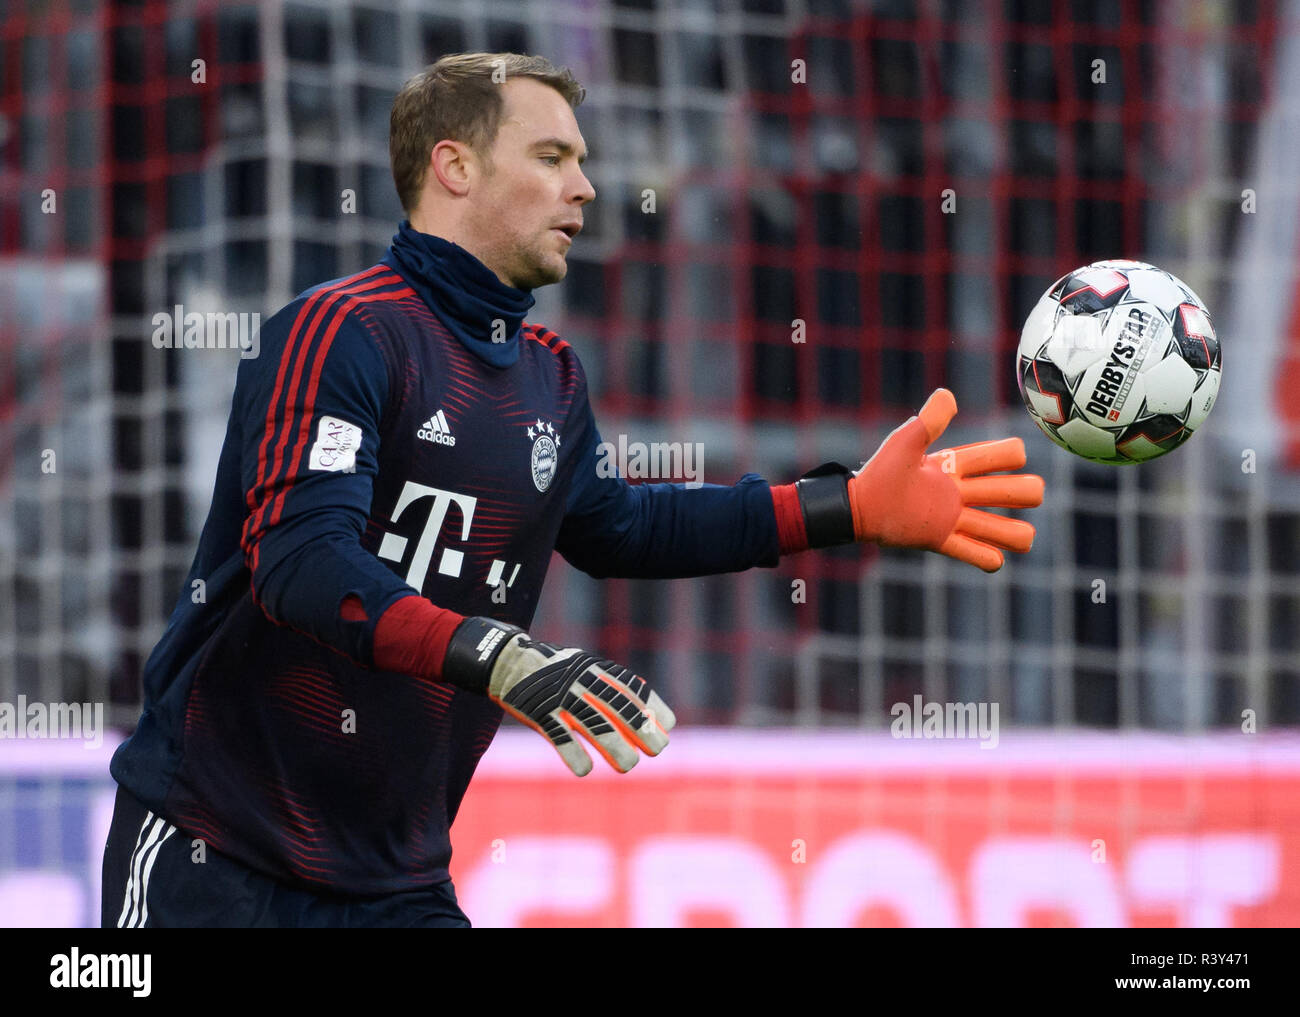 24 November 2018, Bavaria, München: Soccer: Bundesliga, Bayern Munich - Fortuna Düsseldorf, 12th matchday in the Allianz Arena. Goalkeeper Manuel Neuer from Munich warms up. Photo: Sven Hoppe/dpa - IMPORTANT NOTE: In accordance with the requirements of the DFL Deutsche Fußball Liga or the DFB Deutscher Fußball-Bund, it is prohibited to use or have used photographs taken in the stadium and/or the match in the form of sequence images and/or video-like photo sequences. Stock Photo